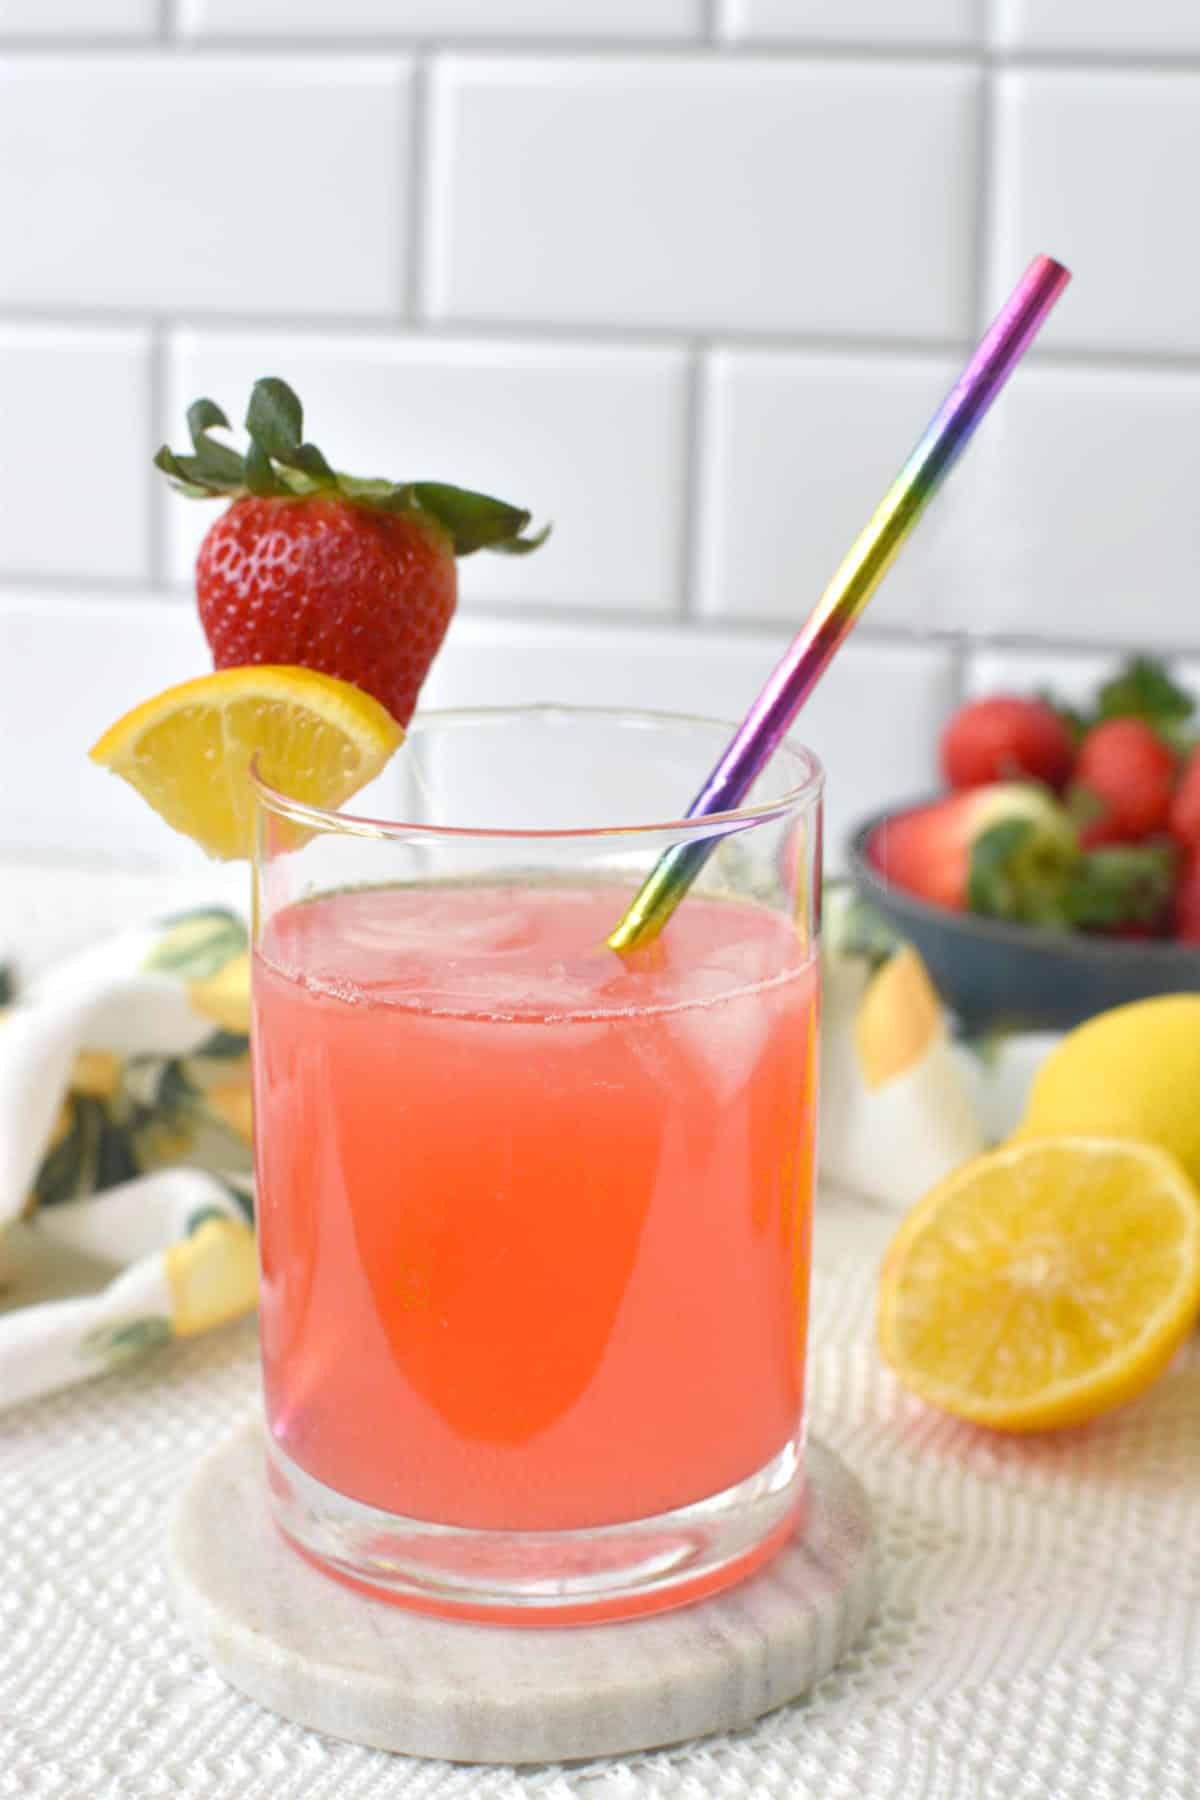 homemade strawberry pink lemonade in a cup with straw, ice, and garnish.